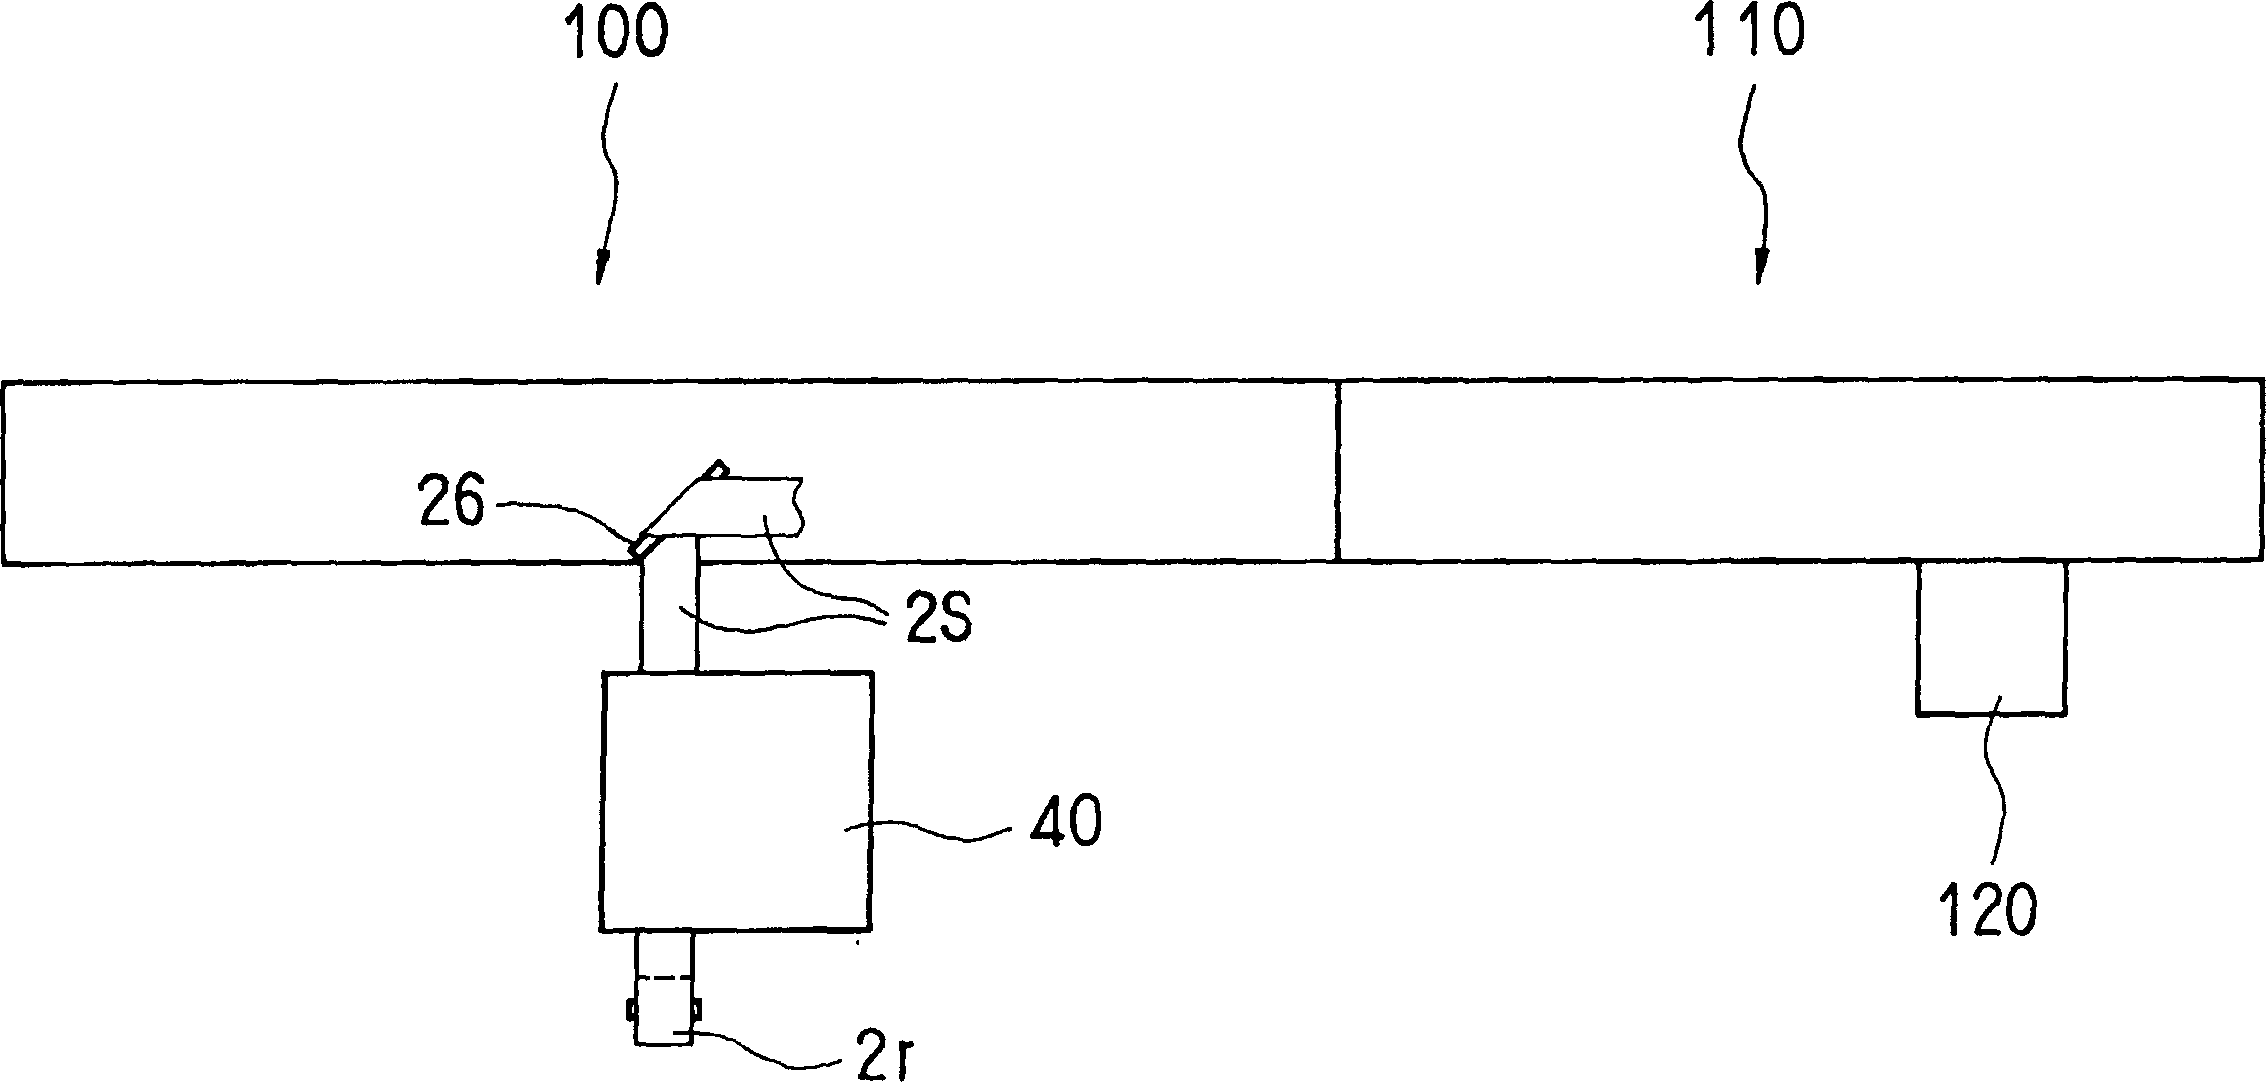 Apparatus for producing sanitary article